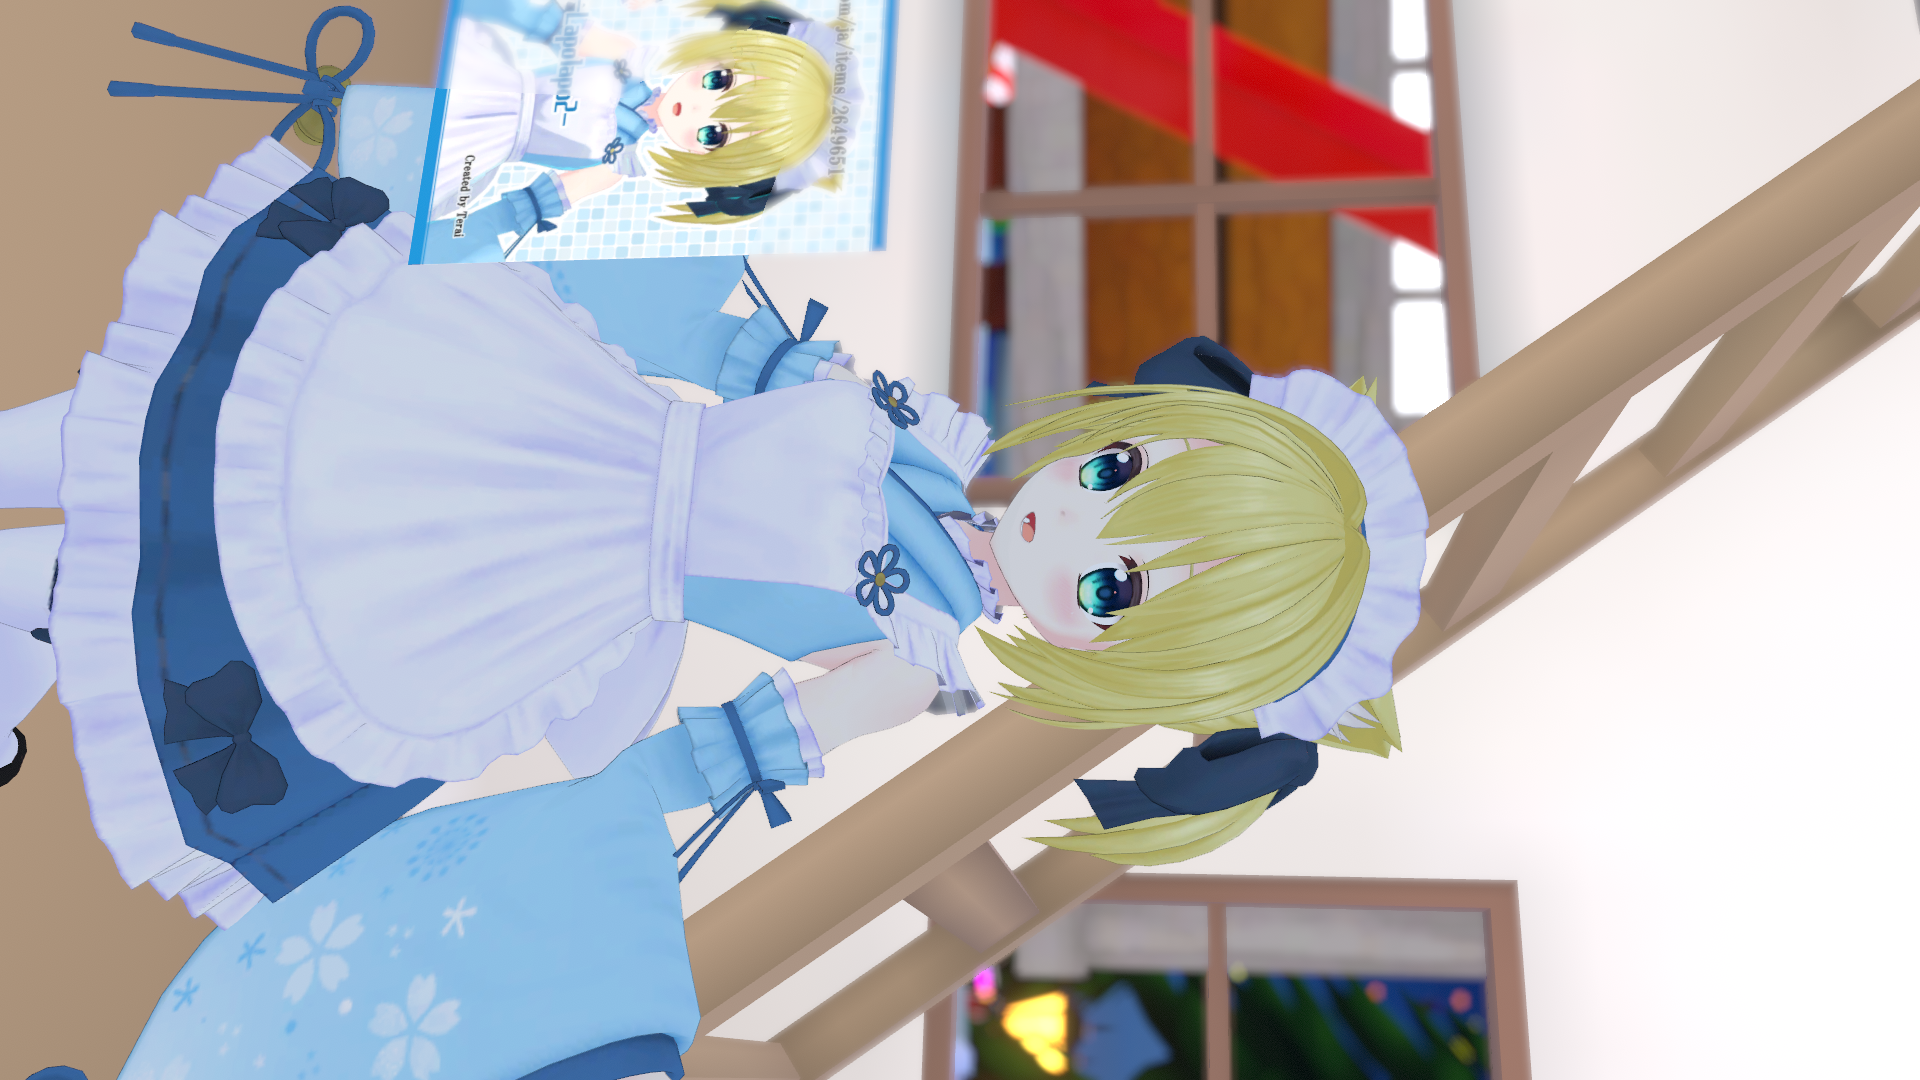 VRChat_1920x1080_2021-12-05_04-58-12.150.png